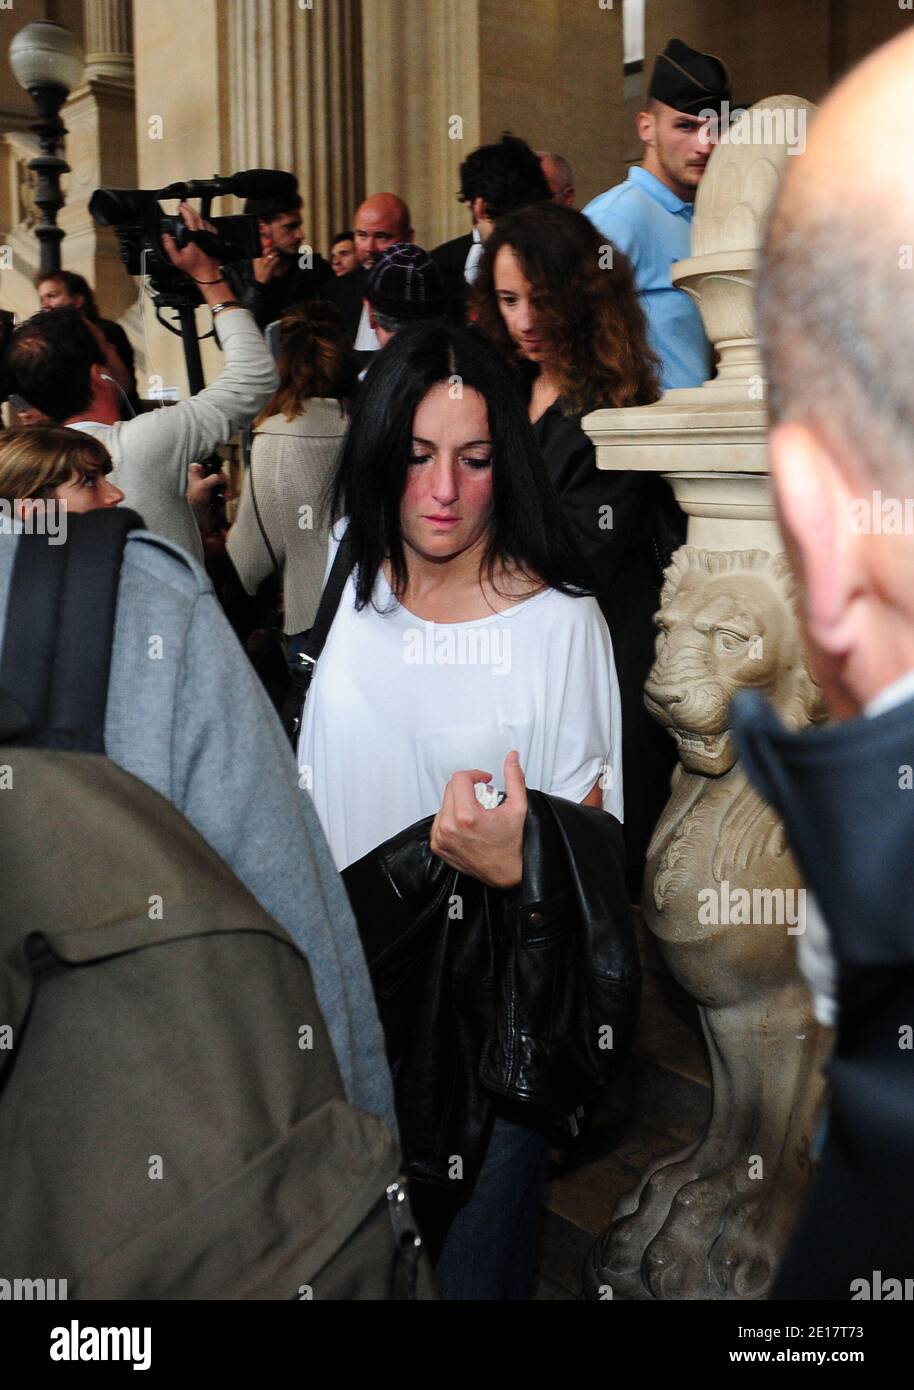 Stephanie Colonna, wife of Yvan Colonna leaving the Paris court hall in Paris, France, on June 20, 2011, after Yvan Colonna's appeal trial for the murder in 1998 of Claude Erignac, France's top state official on the Mediterranean island of Corsica. Photo by Mousse/ABACAPRESS.COM Stock Photo